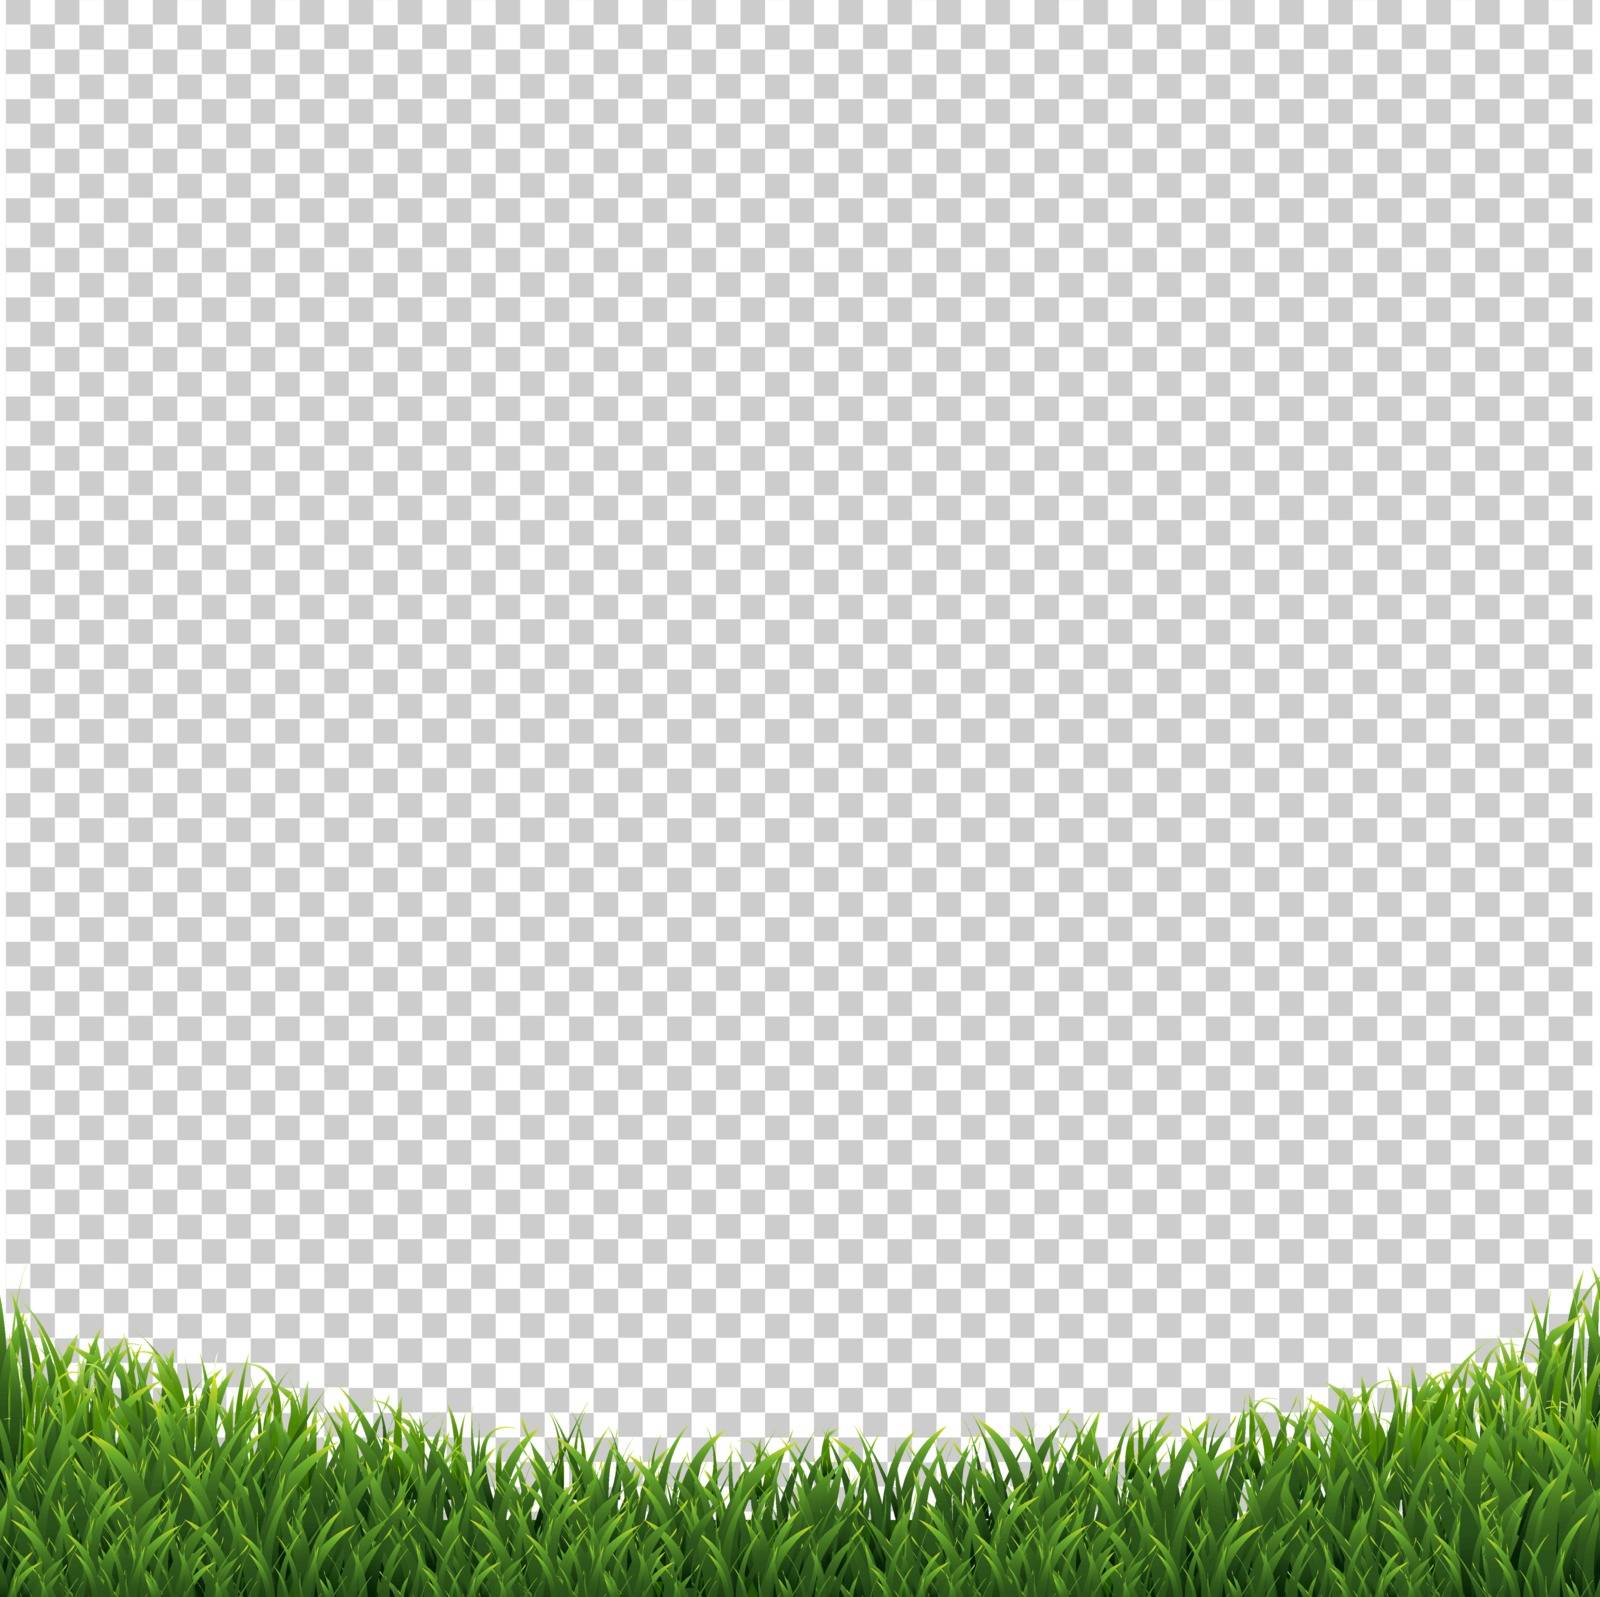 Grass Isolated Background Transparent Background, Vector Illustration